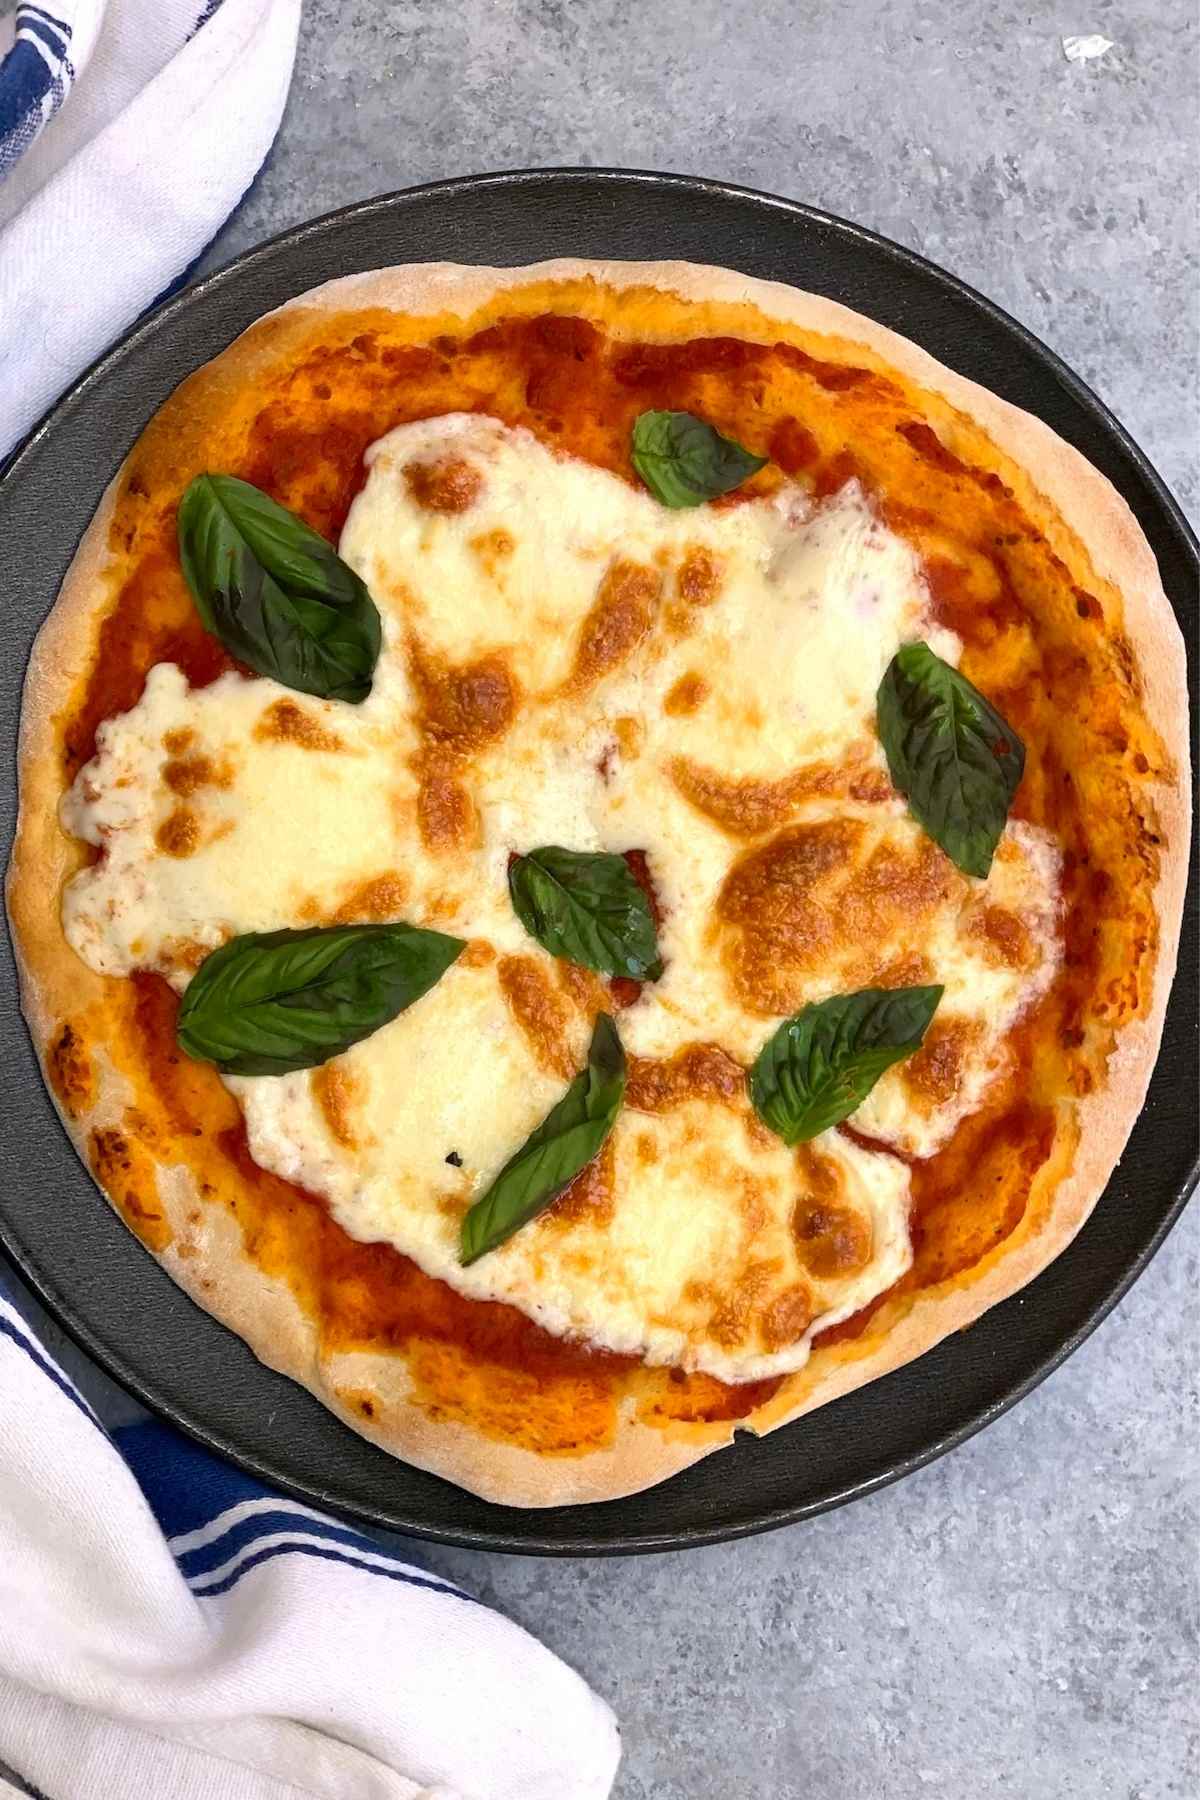 Also known as Pizza Napoletana, Neapolitan Pizza is one of the most famous varieties of pizza, baked daily in restaurants all over the world. With high-quality ingredients, you can create a Naples-worthy pizza in your oven at home. It’s a fun project for beginners who love experimenting in the kitchen.